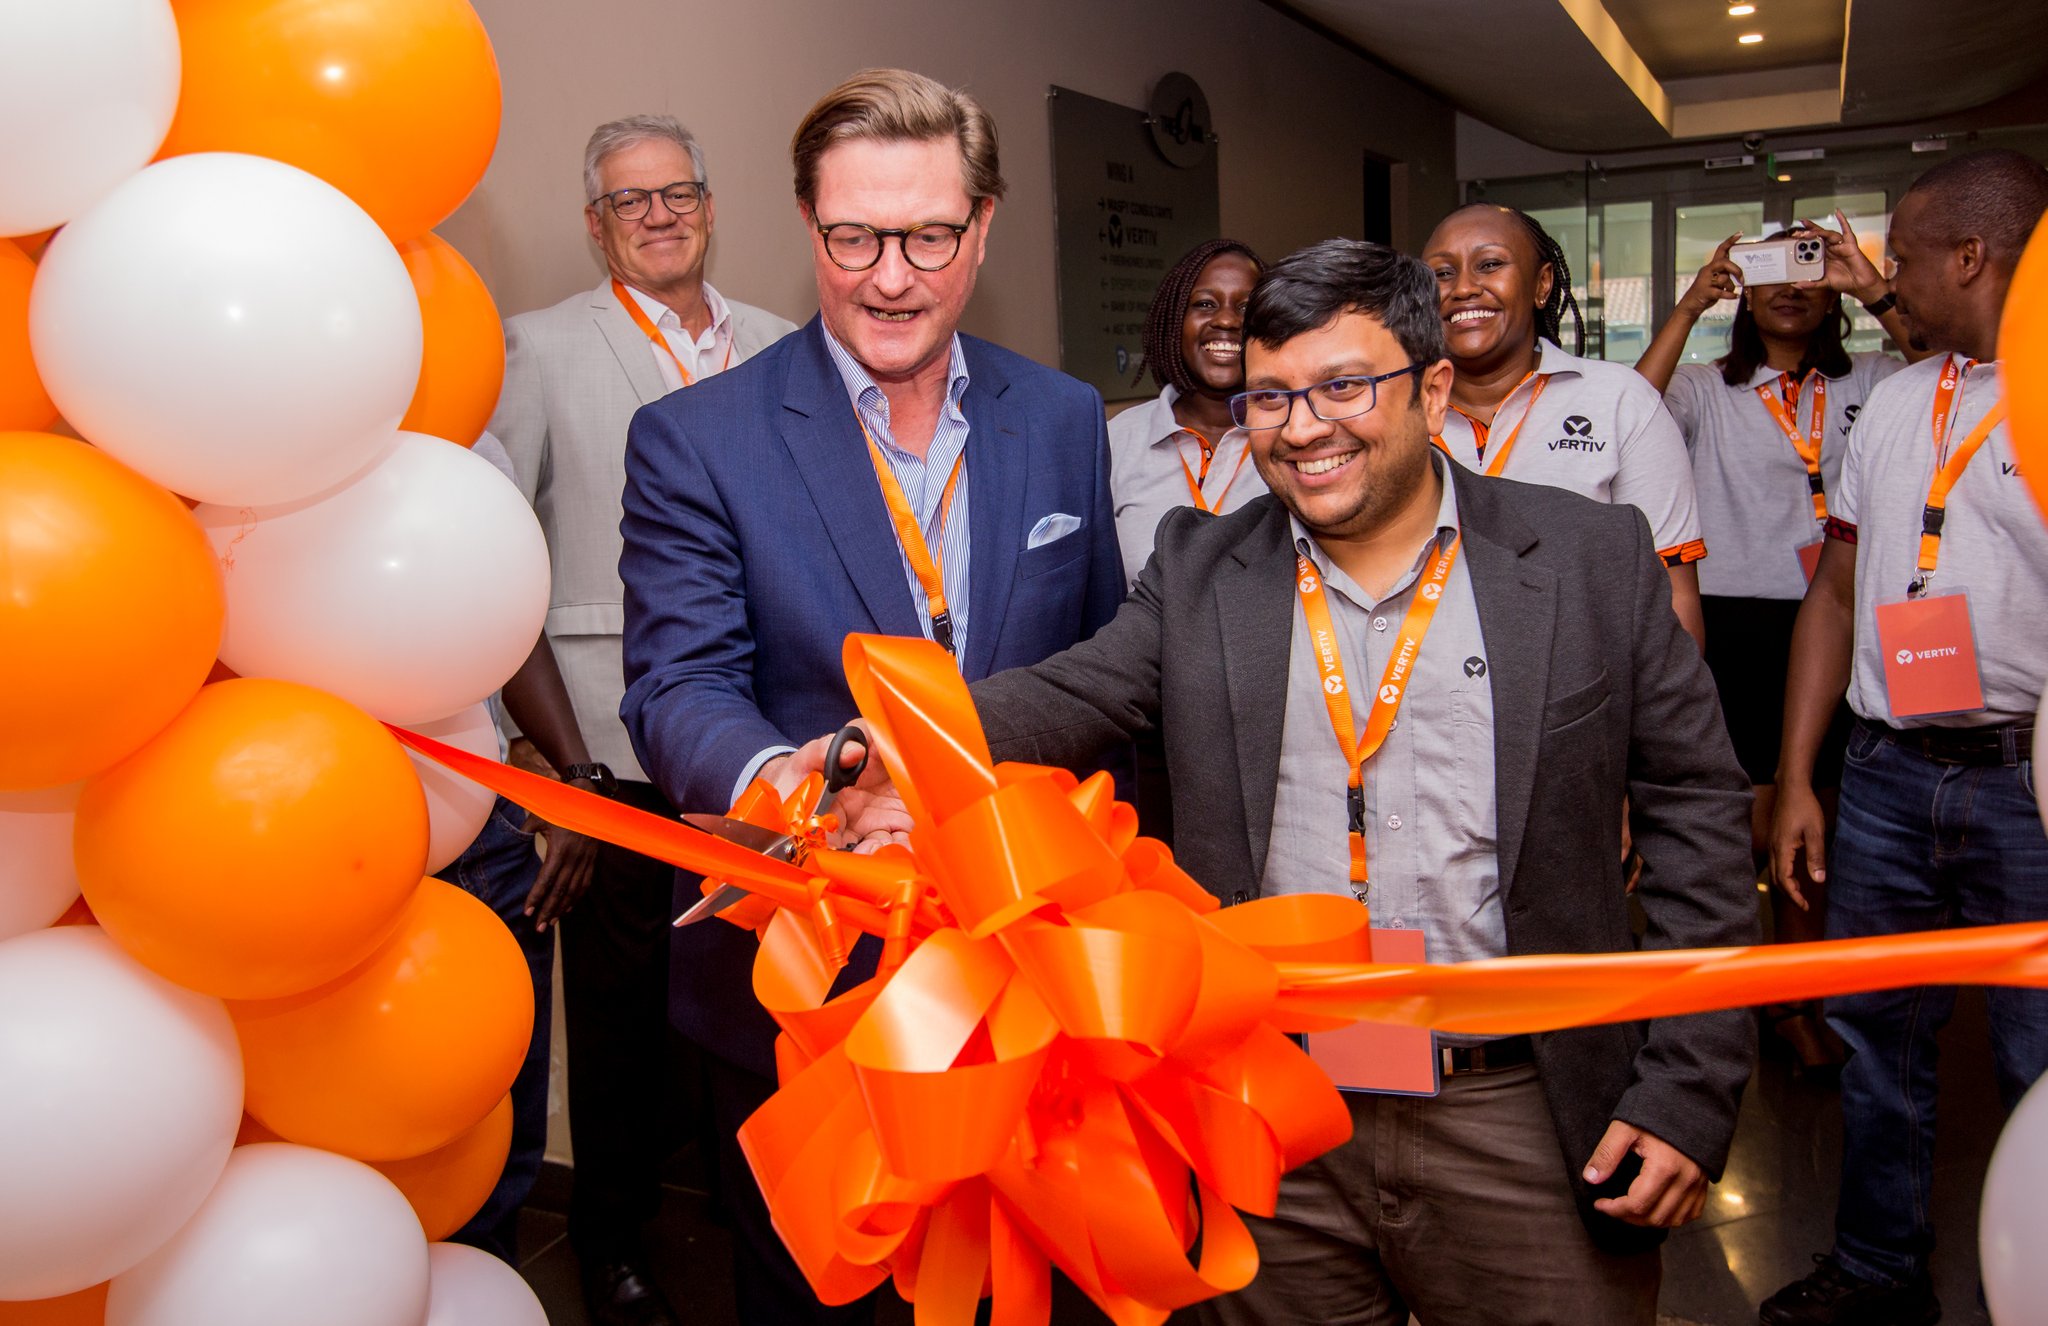 The establishment of Vertiv’s Kenyan Customer Experience Center is part of the company’s growing footprint in Africa to modernize infrastructure and drive digital transformation.